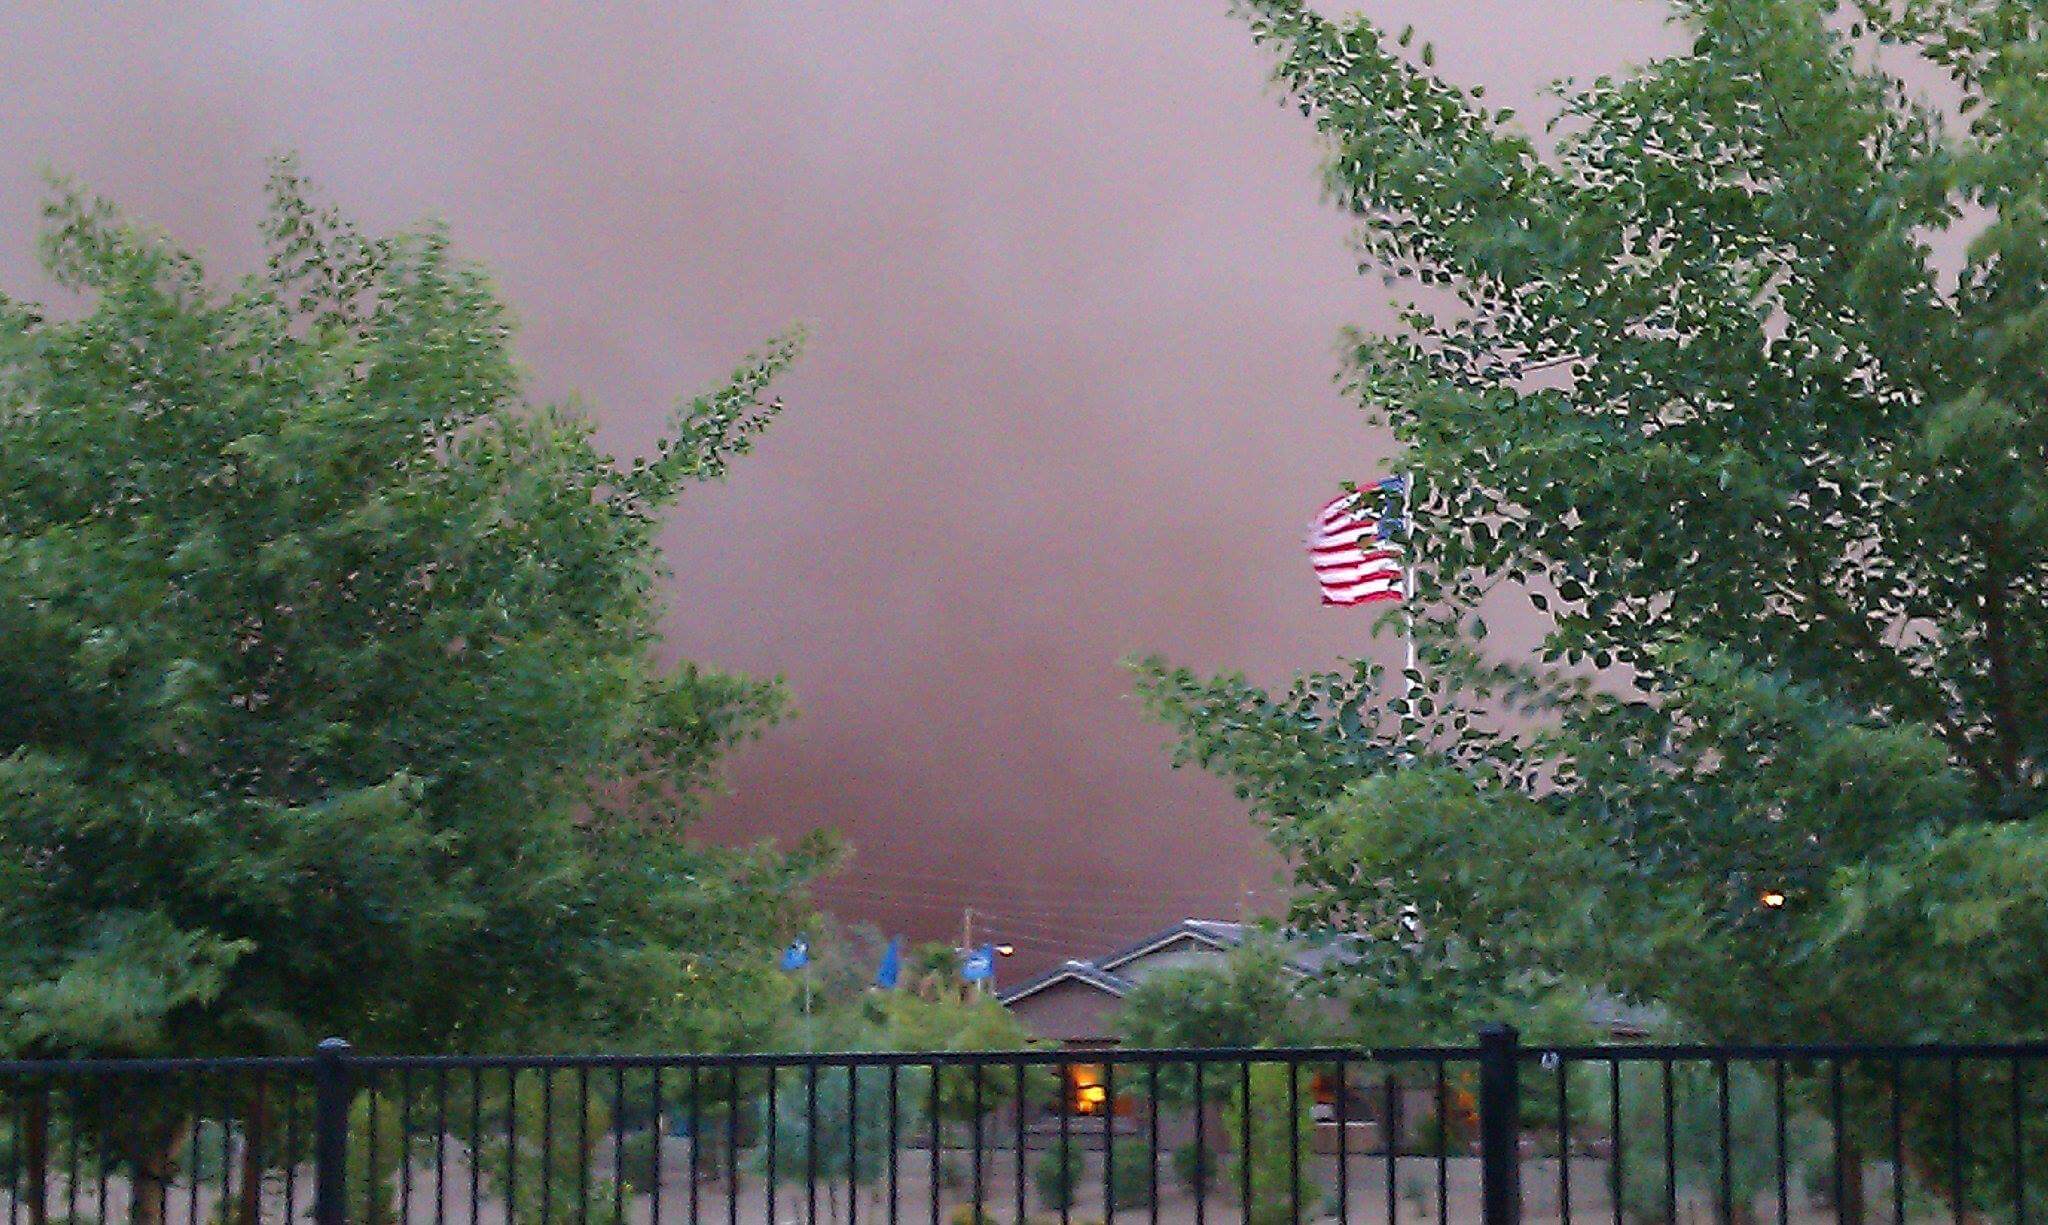 A haboob view from my backyard last summer